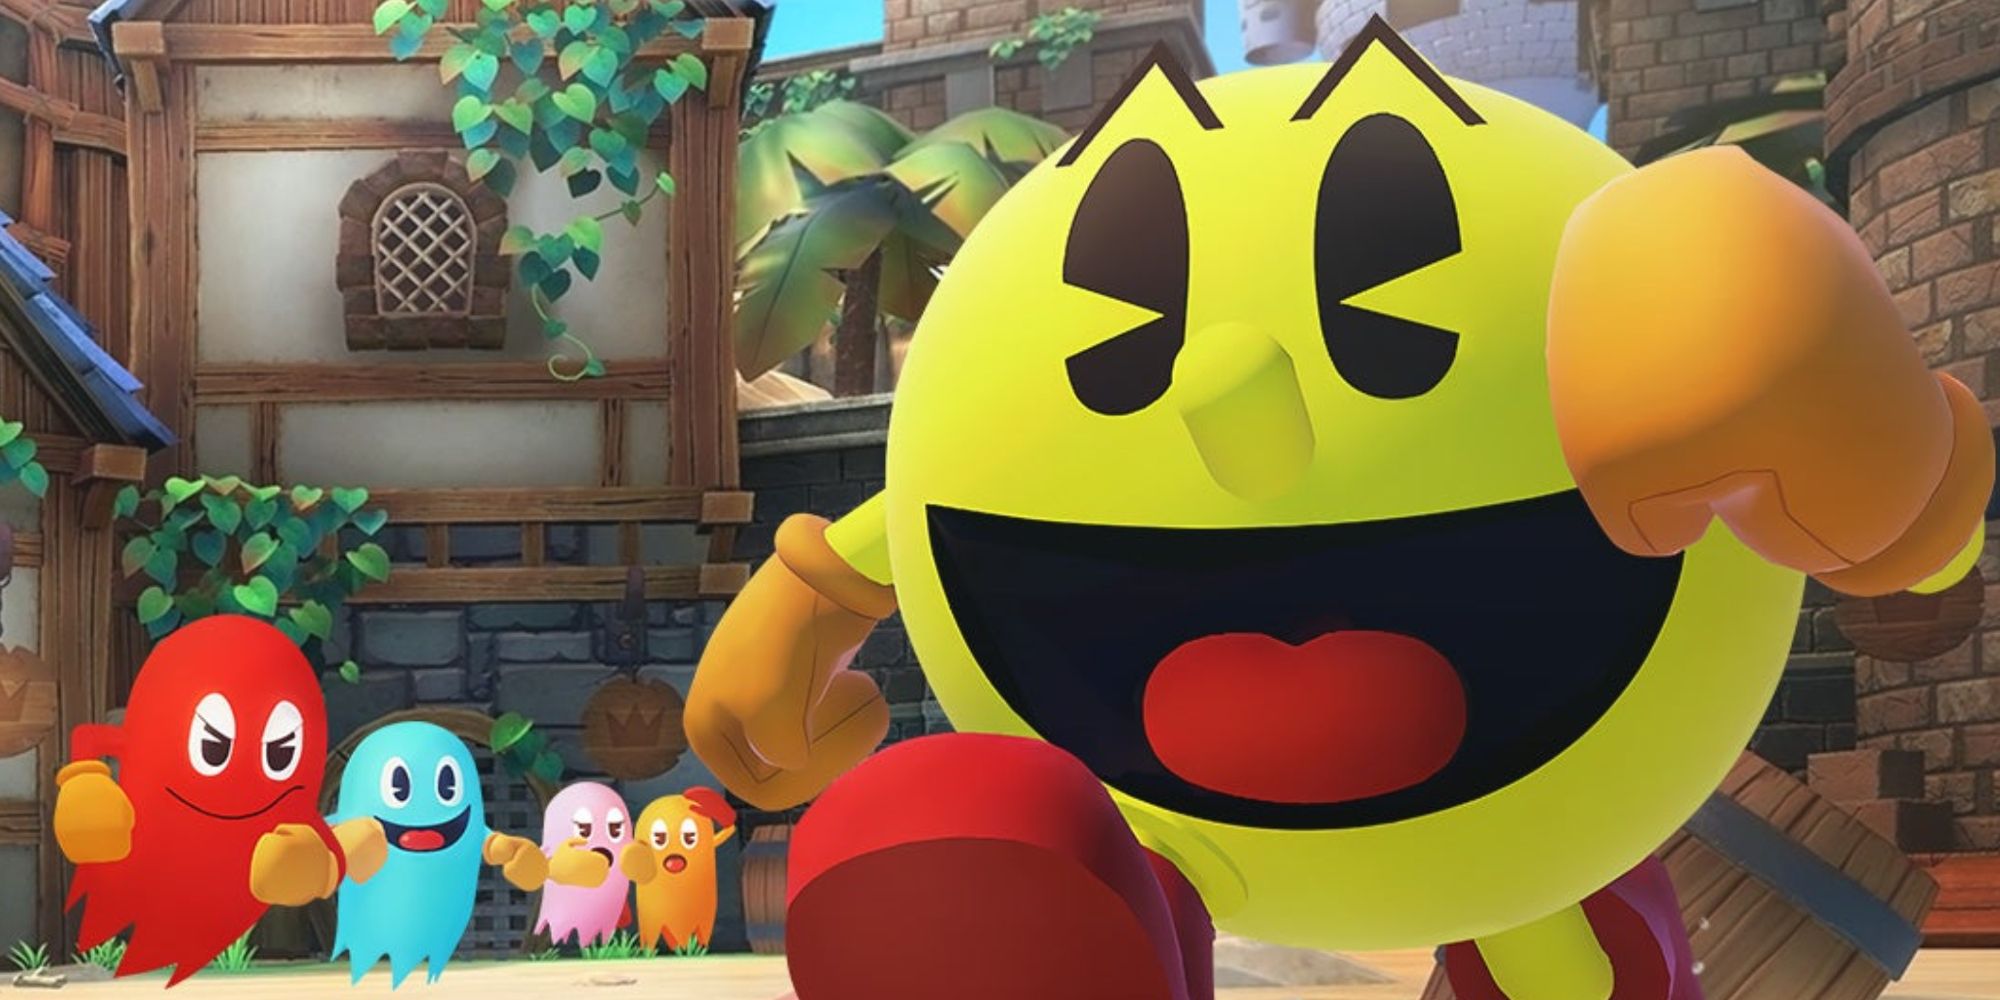 Pac-Man runs from ghosts in Pac-Man World Repac